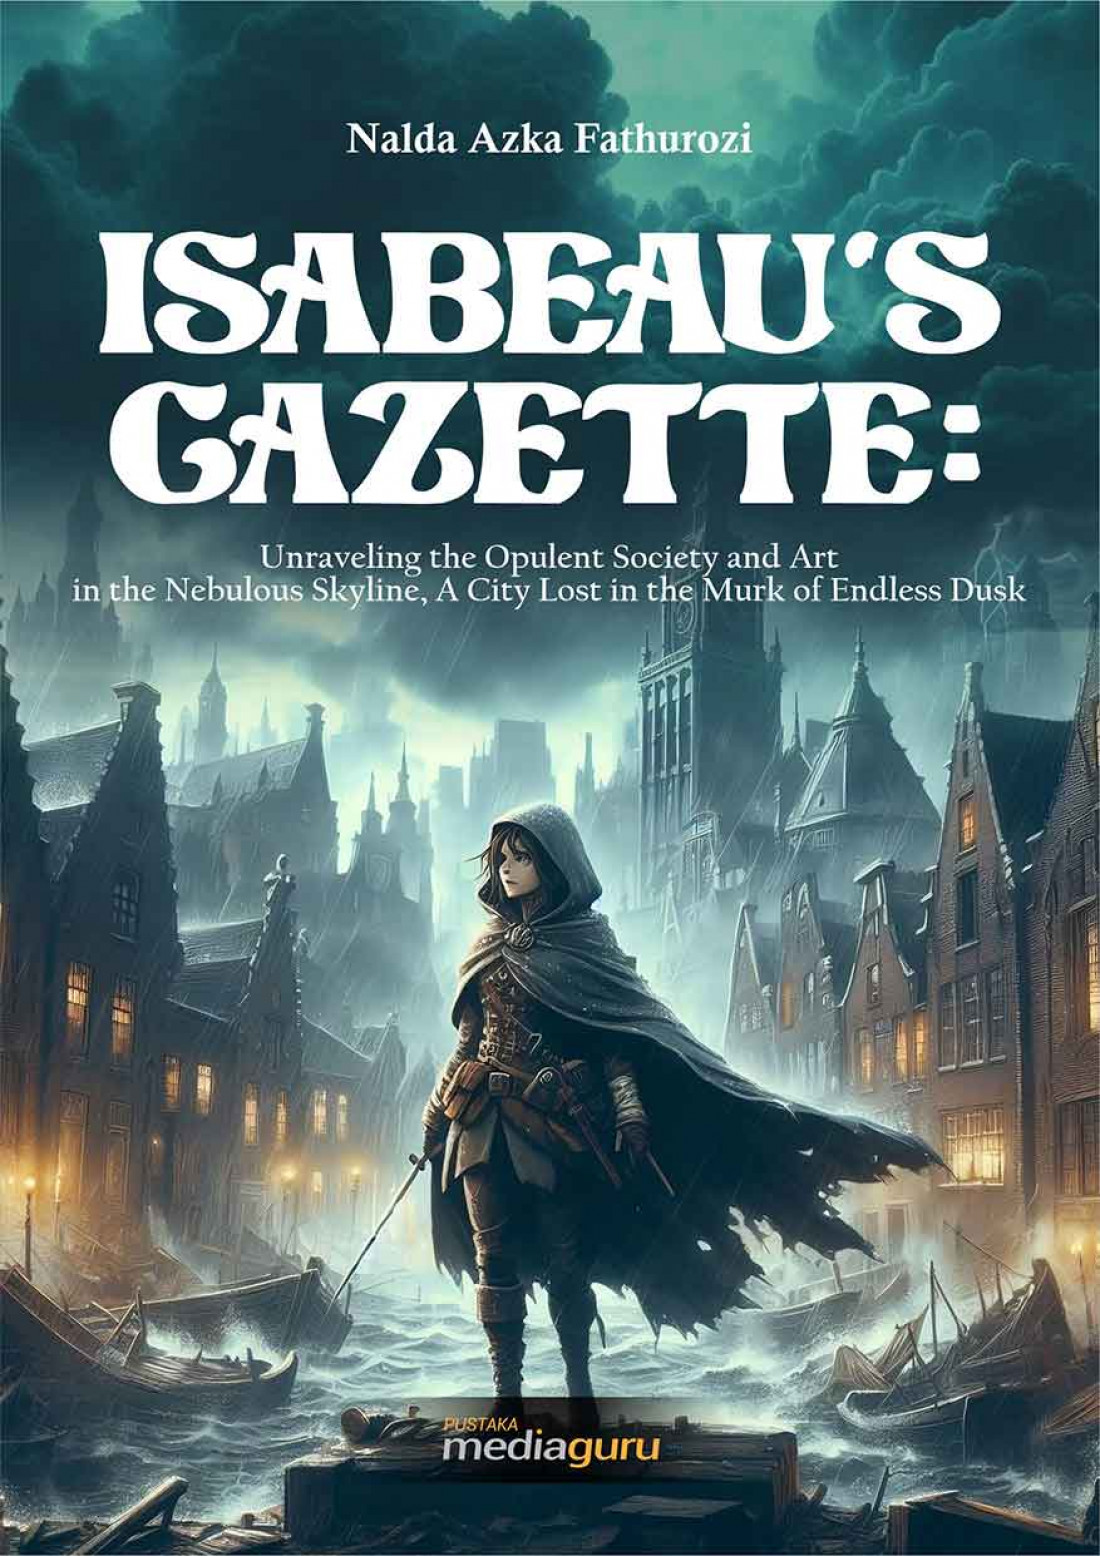 Isabeau’s Gazette: Unraveling the Opulent Society and Art in the Nebulous Skyline, A City Lost in the Murk of Endless Dusk